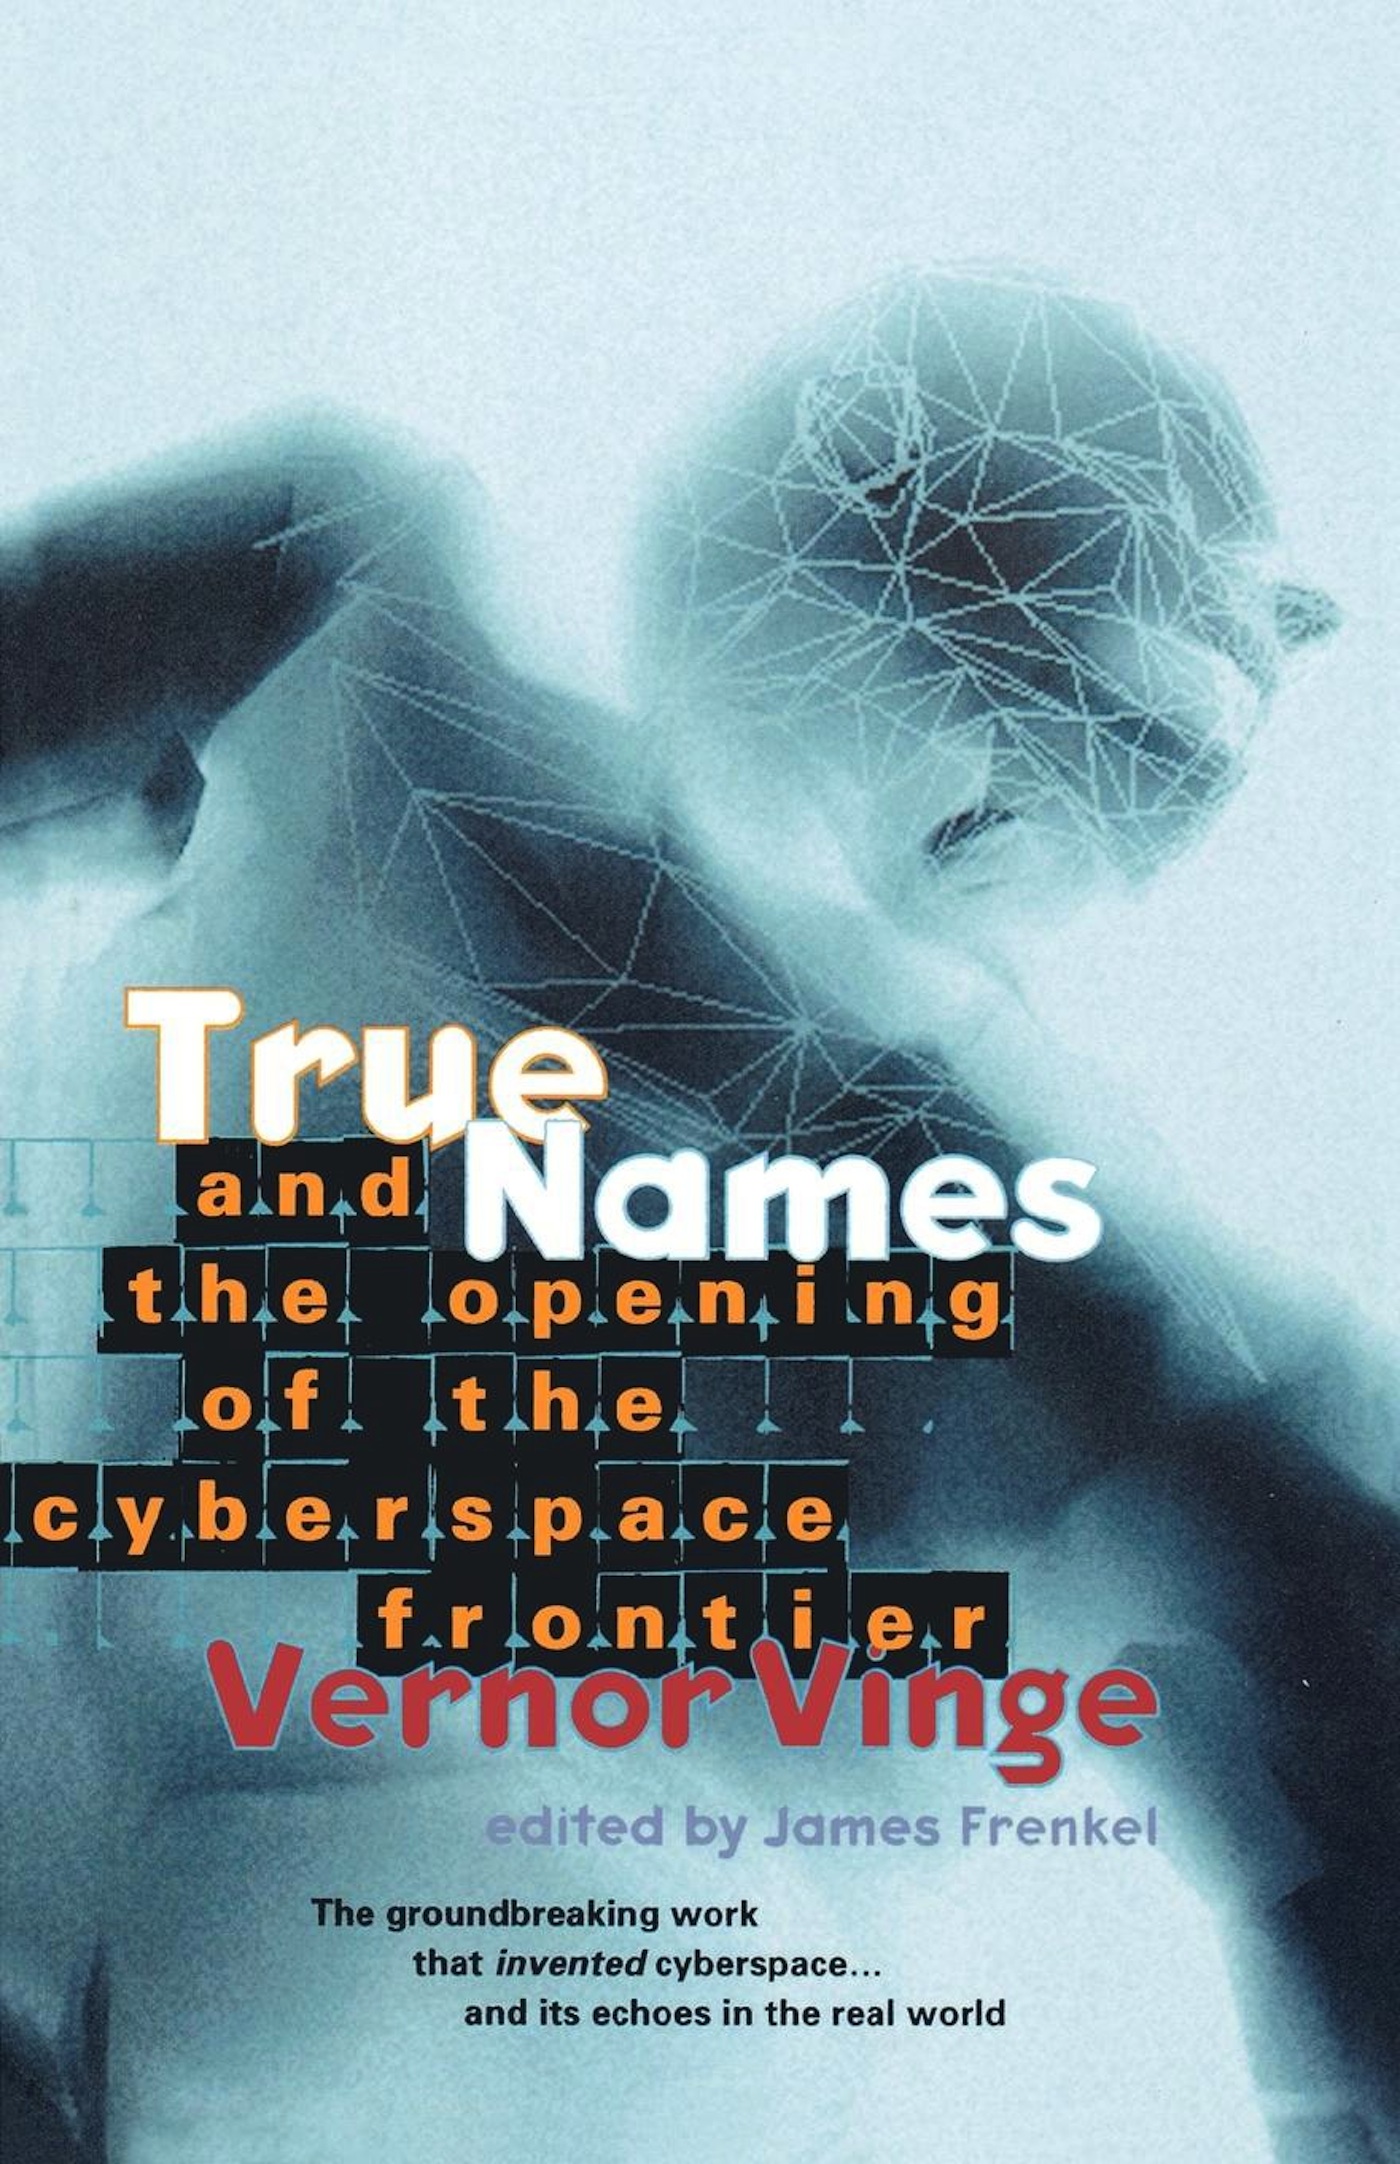 True Names and the Opening of the Cyberspace Frontier by Vernor Vinge